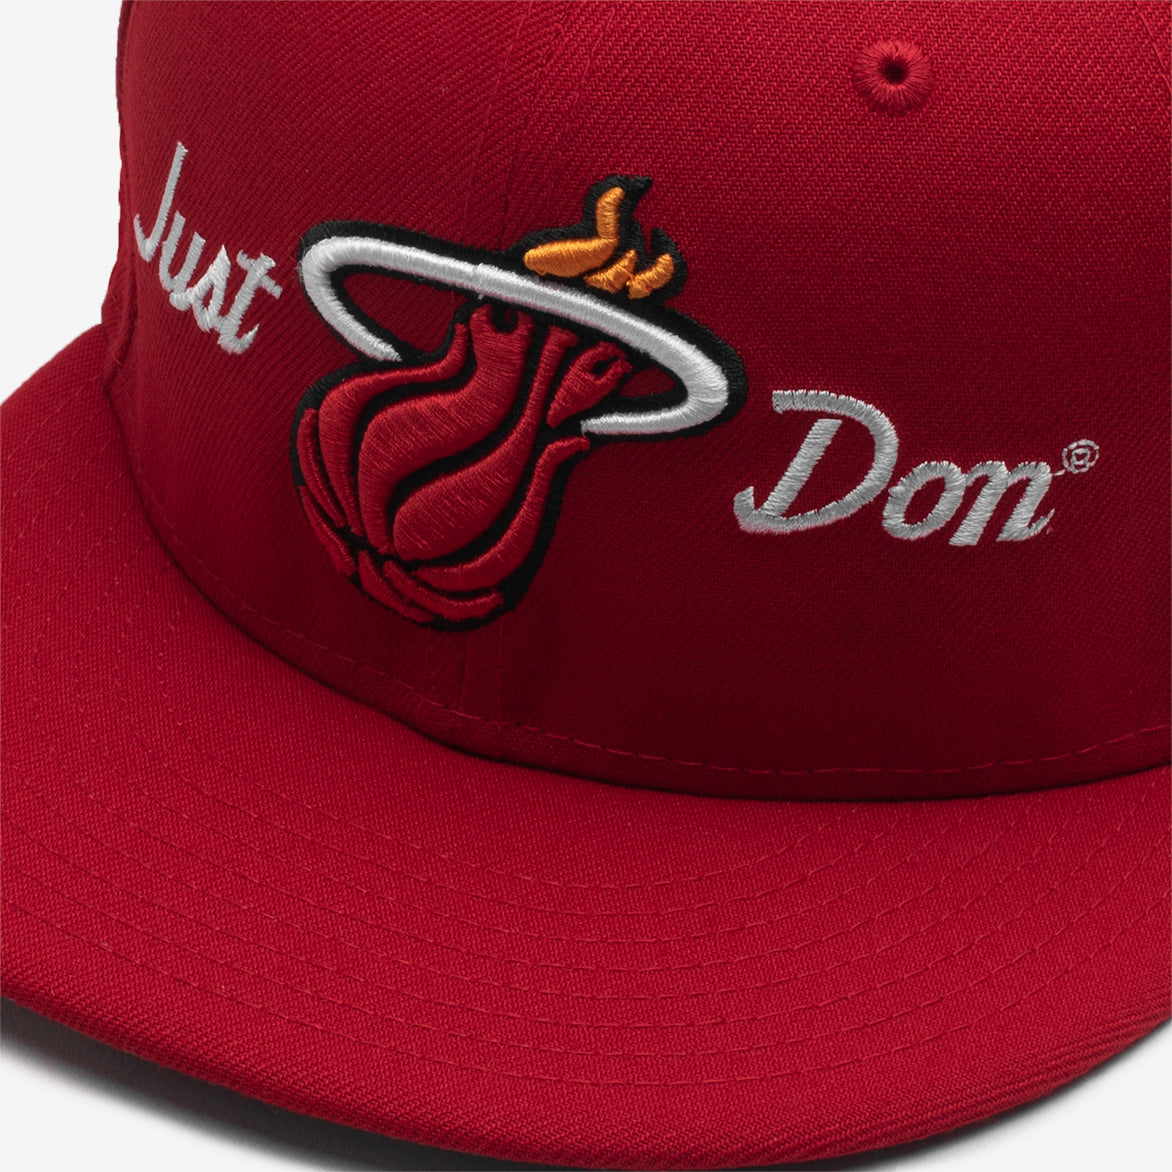 JUST DON X NEW ERA NBA 59FIFTY FITTED "HEAT"